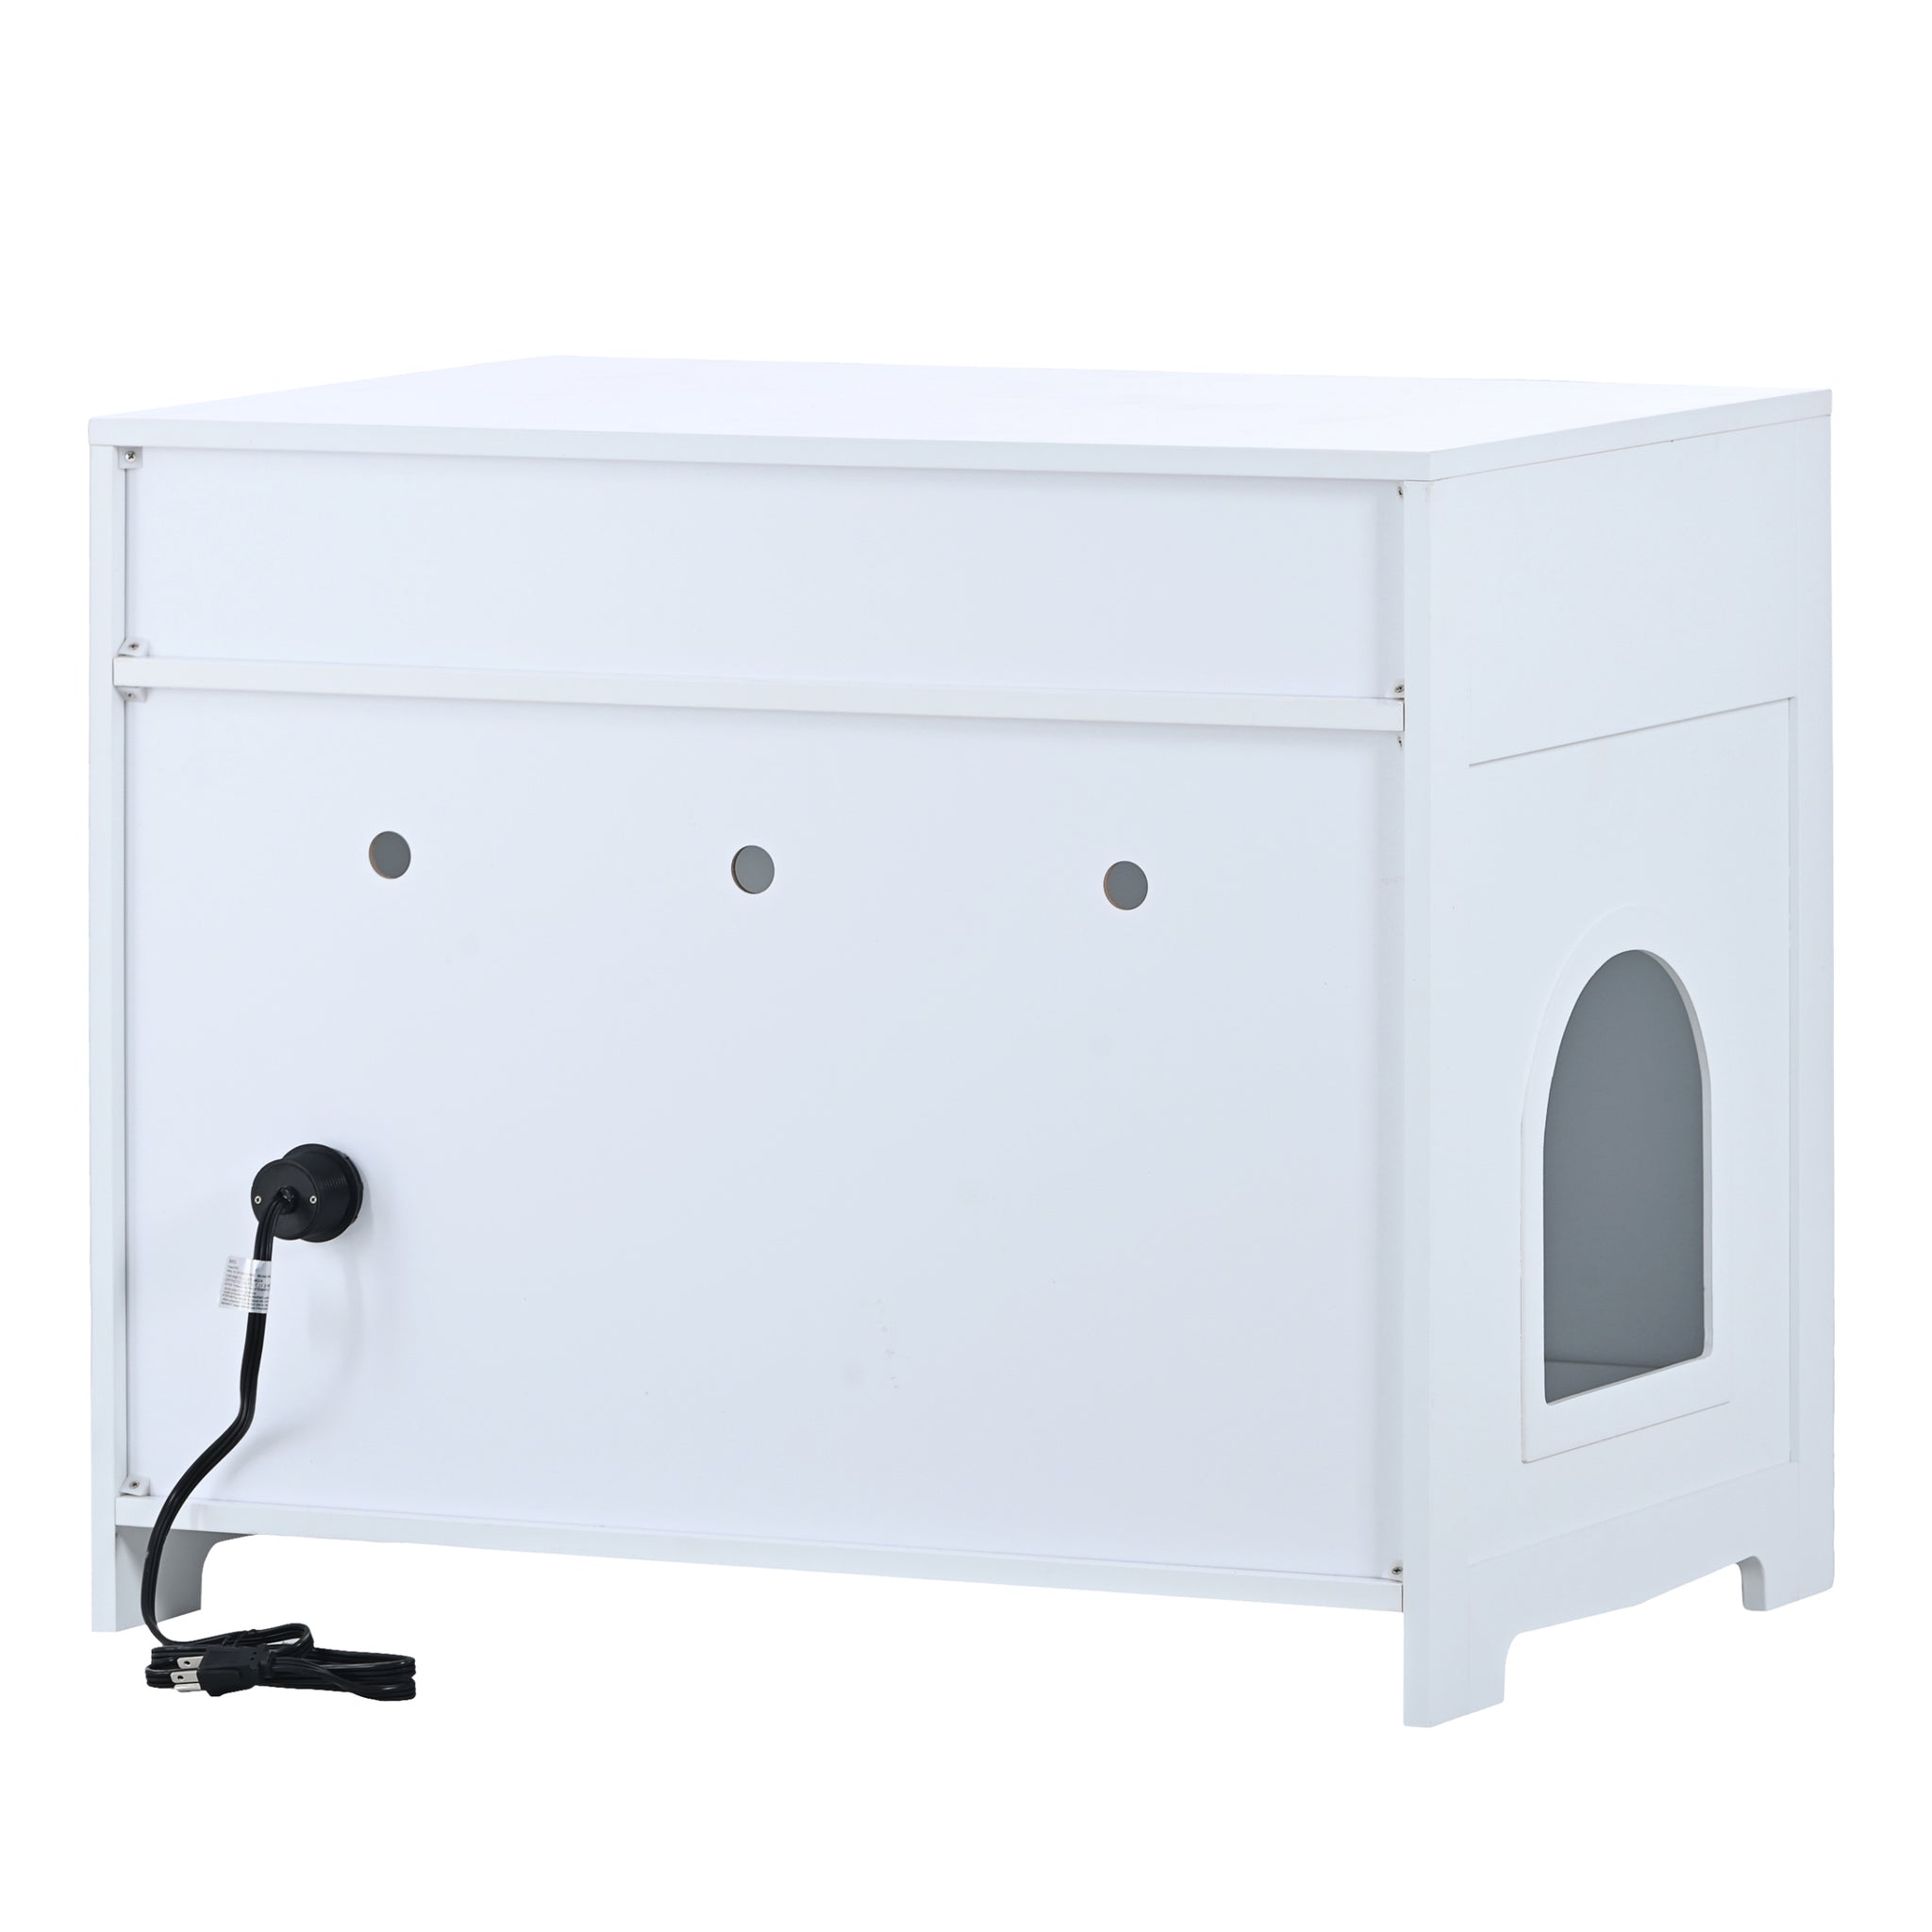 Litter Box Enclosure, Cat Litter Box Furniture with white-mdf